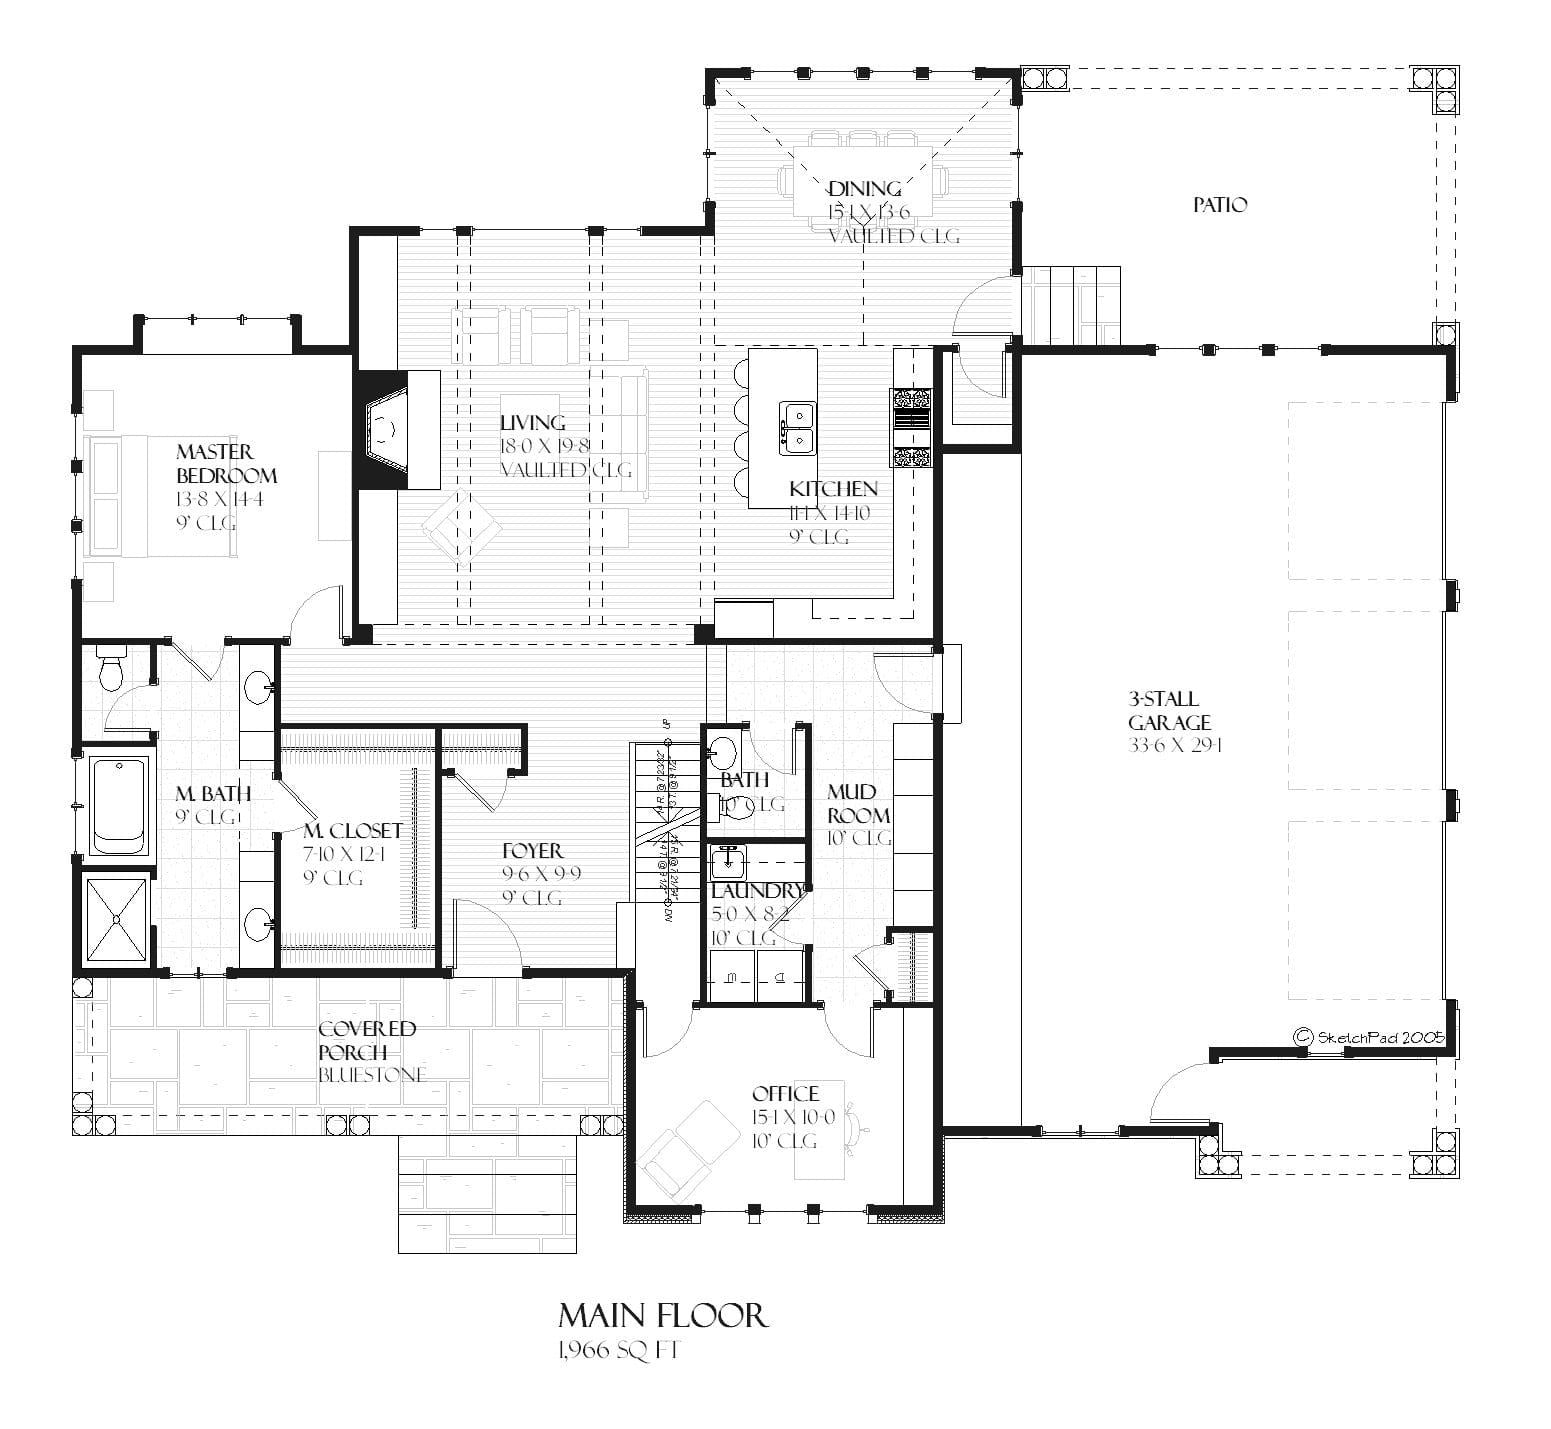 Storybook - Home Design and Floor Plan - SketchPad House Plans